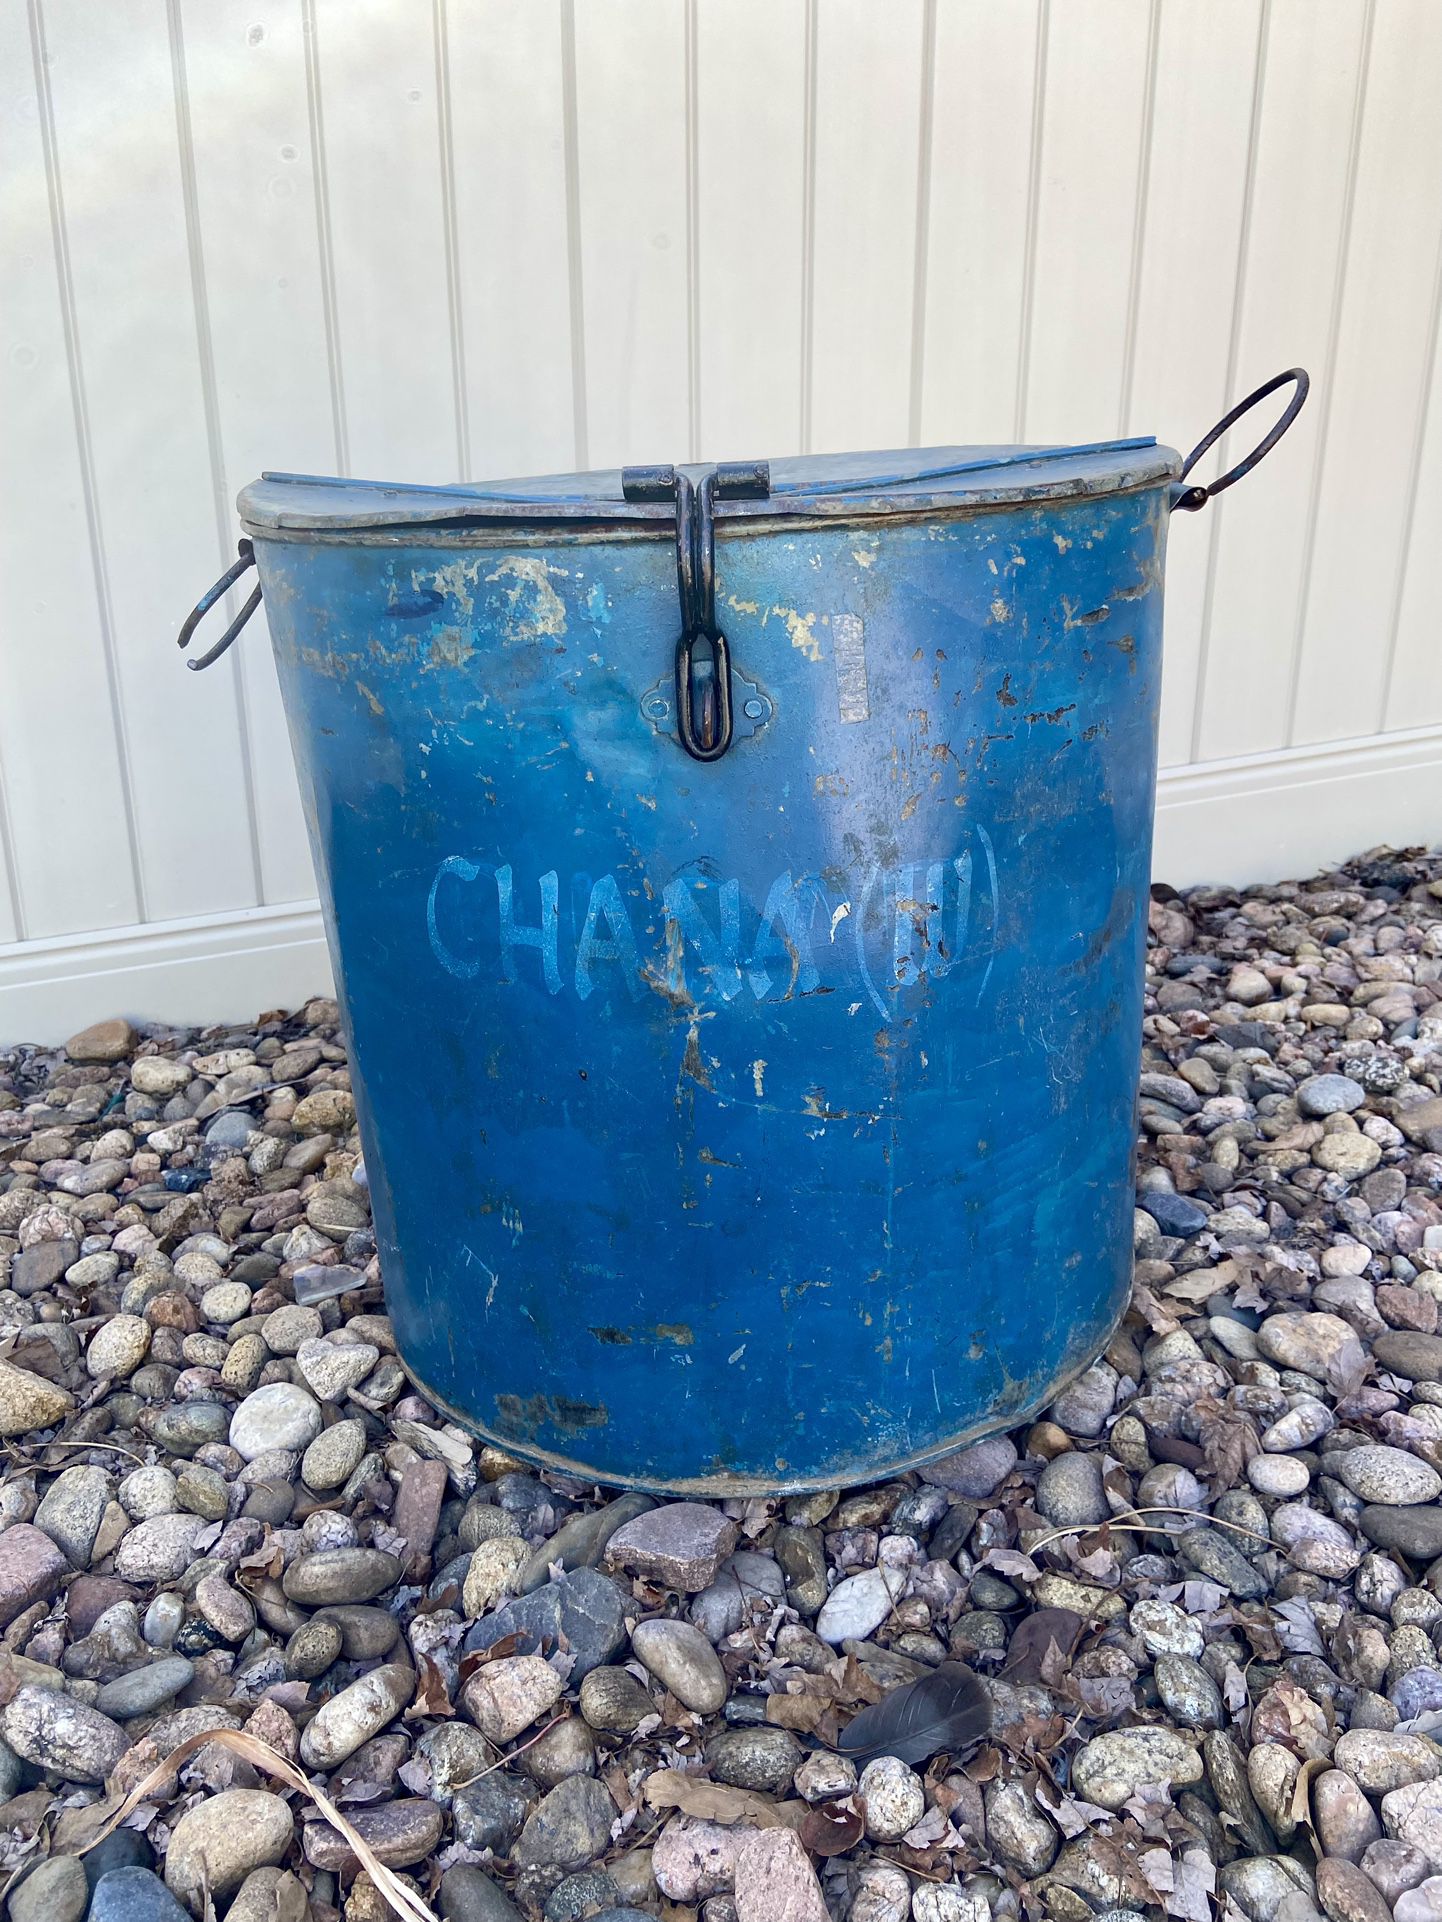 Chana Metal Industrial Container 